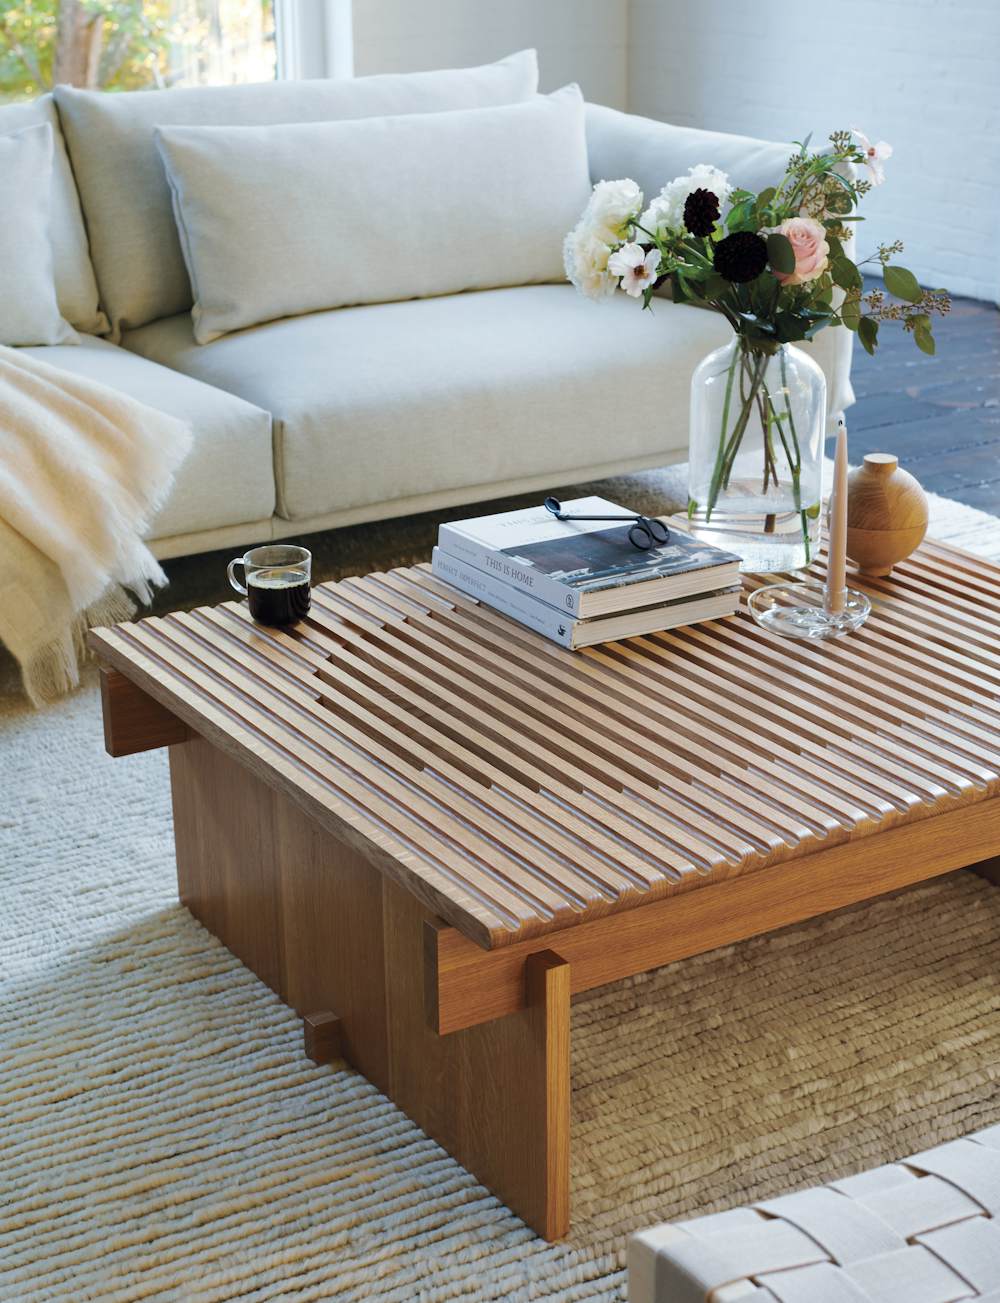 Kam Coffee Table in a living room setting